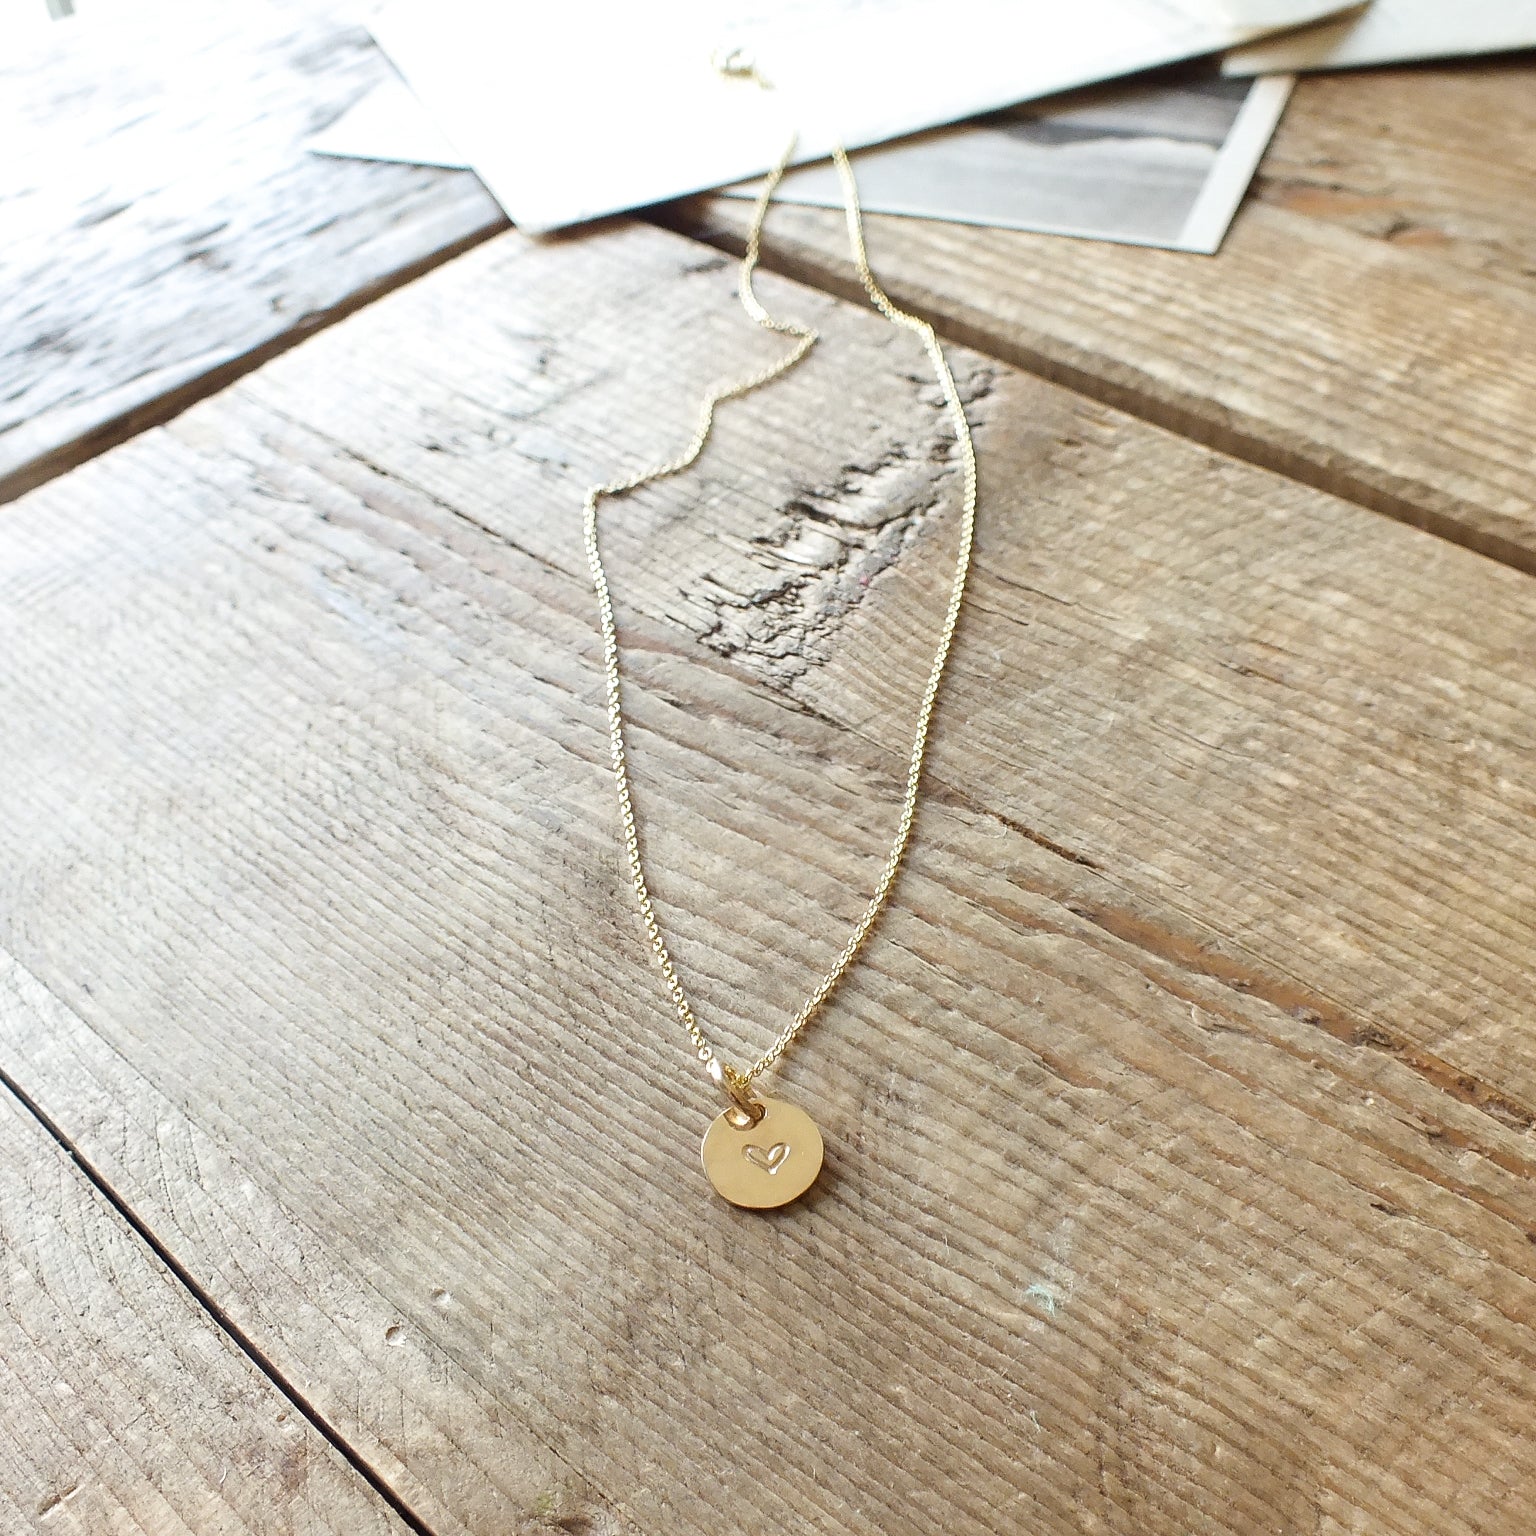 Becoming Jewelry's Heart Necklace displayed on a wooden surface.